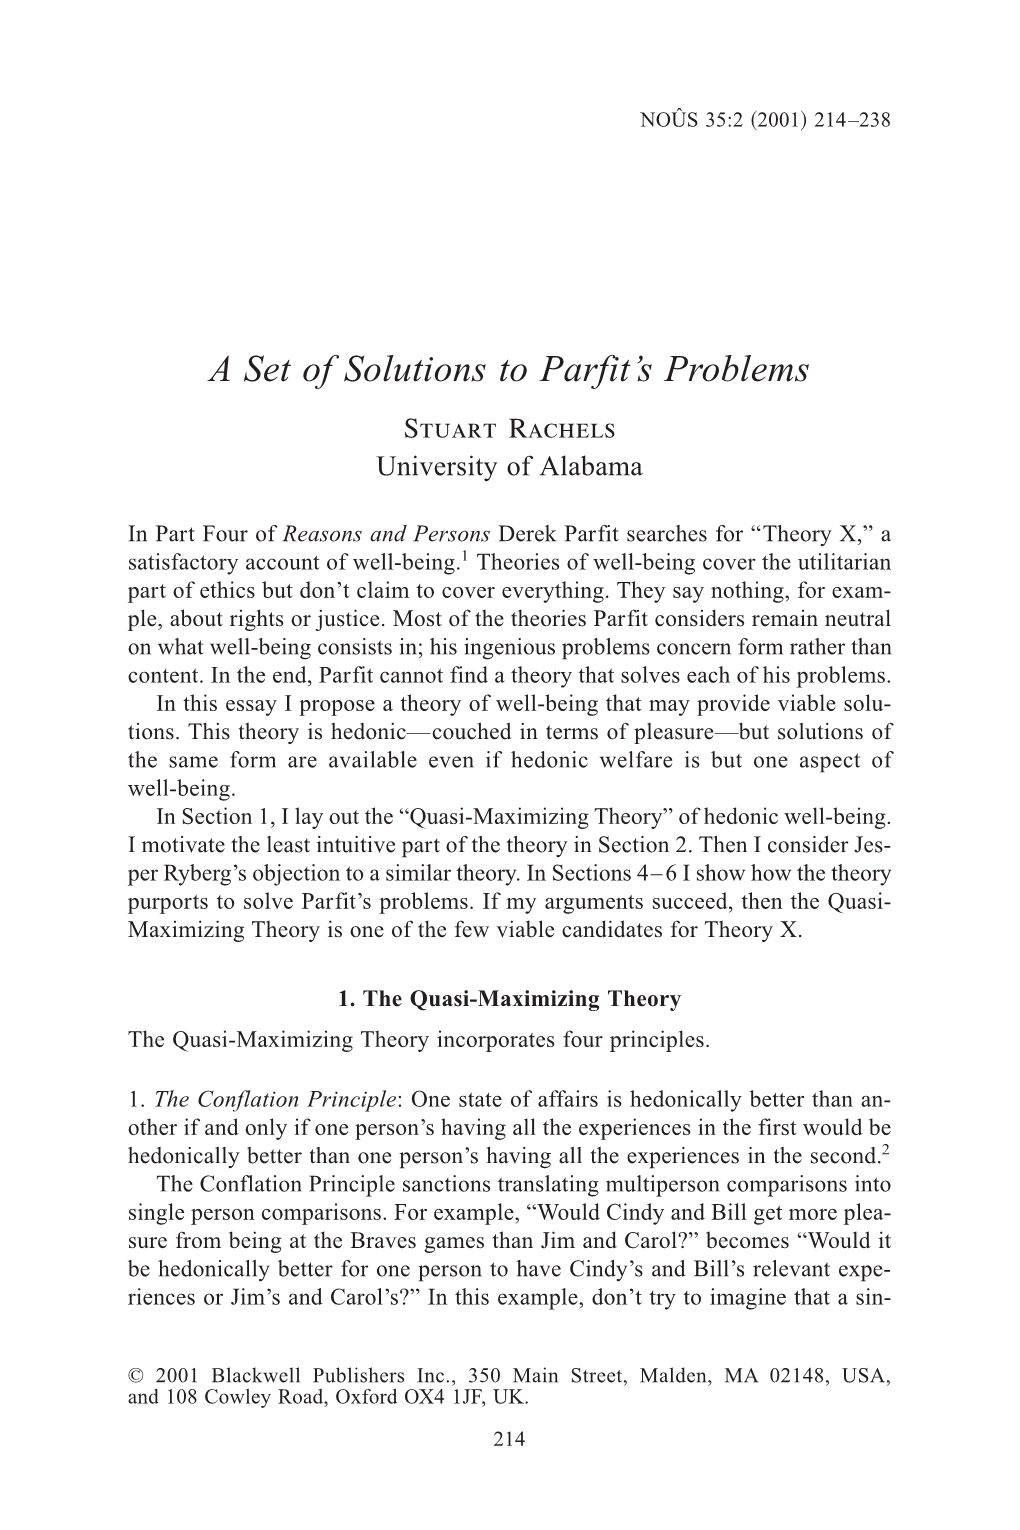 A Set of Solutions to Parfit's Problems